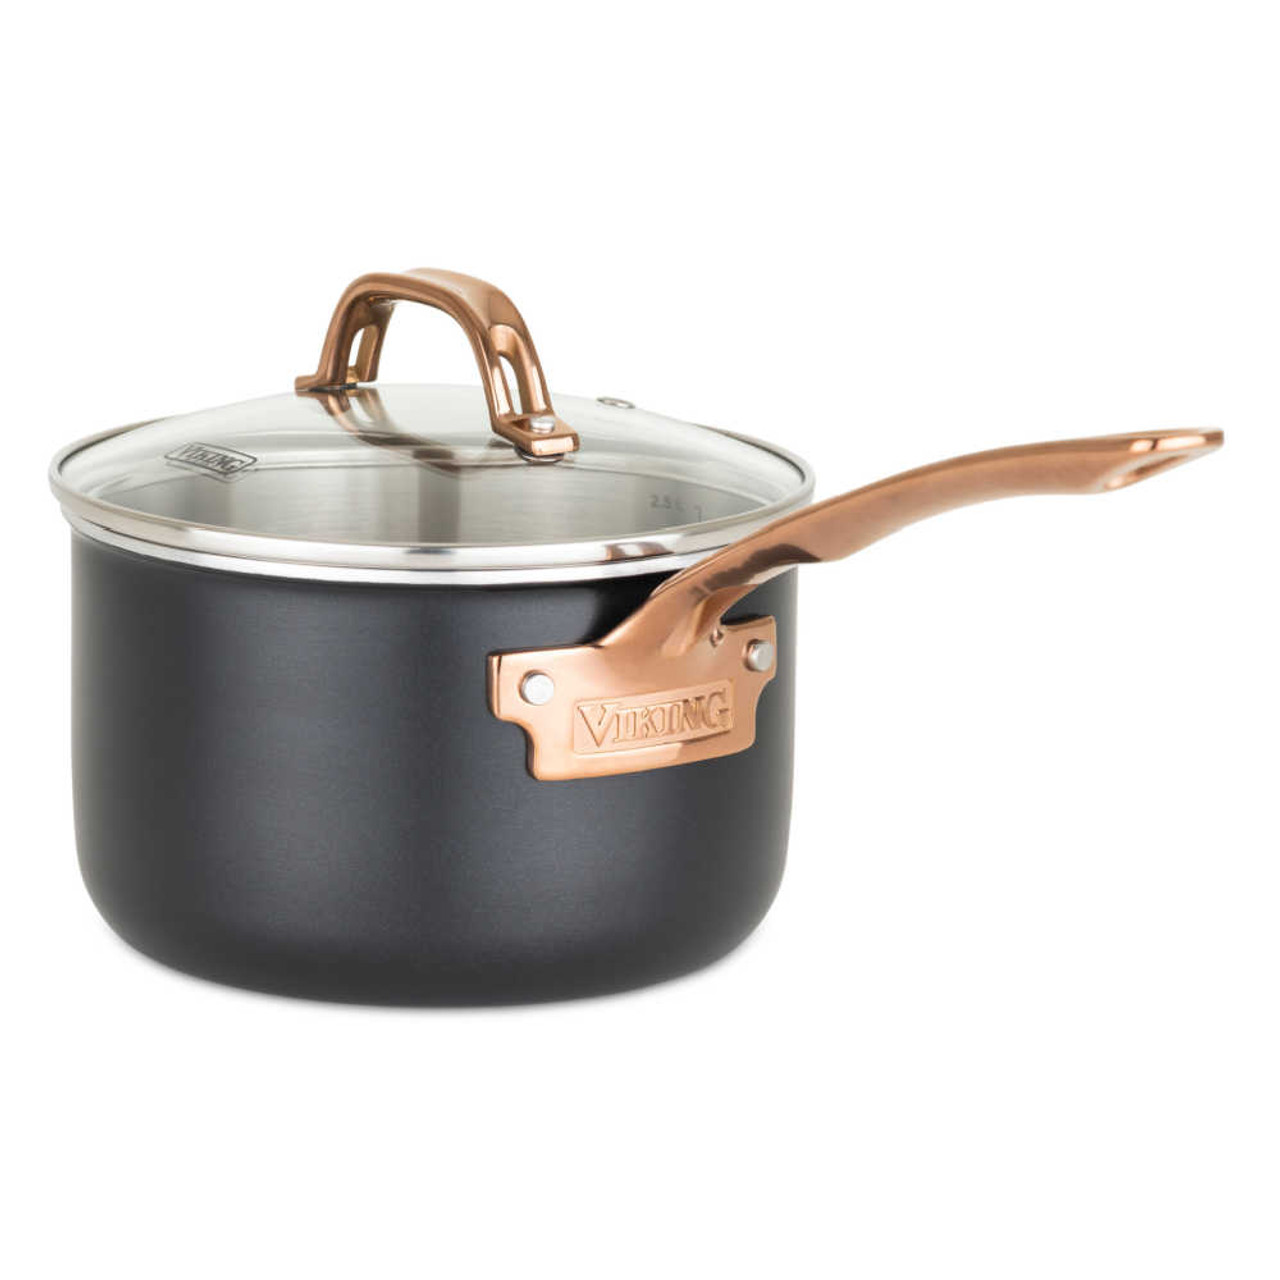 https://cdn11.bigcommerce.com/s-hccytny0od/images/stencil/1280x1280/products/4844/19850/Viking_Matte_Black_and_Copper_11-Piece_Cookware_Set_3__53830.1656363419.jpg?c=2?imbypass=on